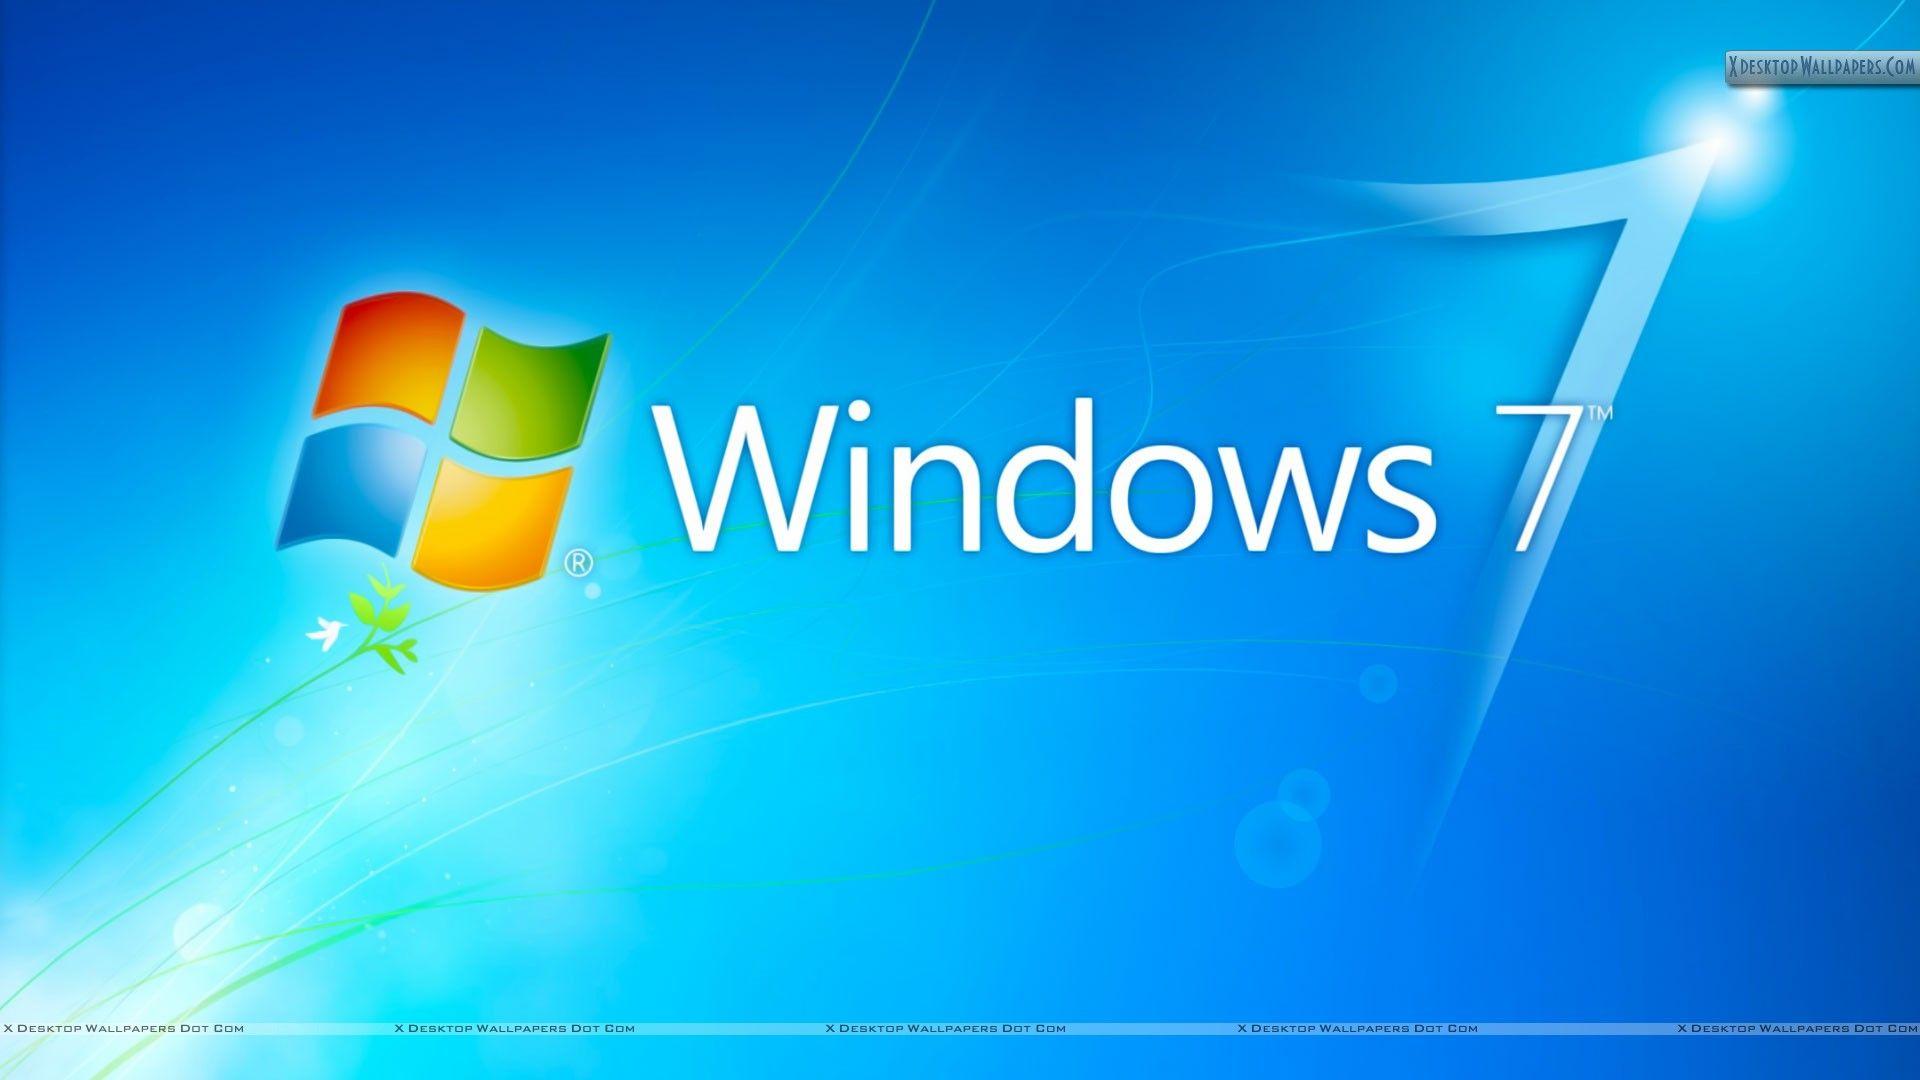 Windows 7 Background Images - Wallpaper Cave